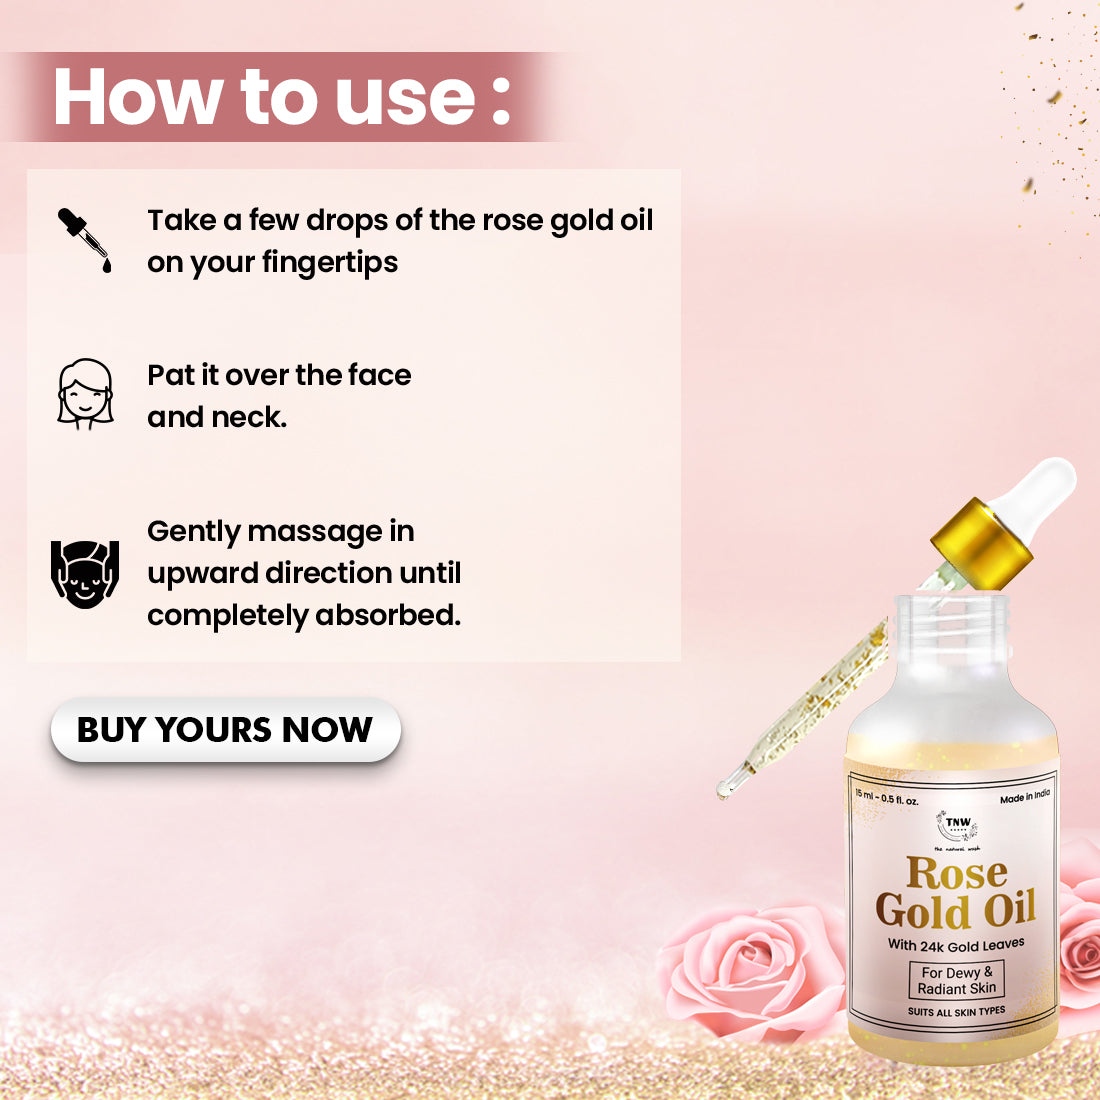 How to use Rose Gold Oil